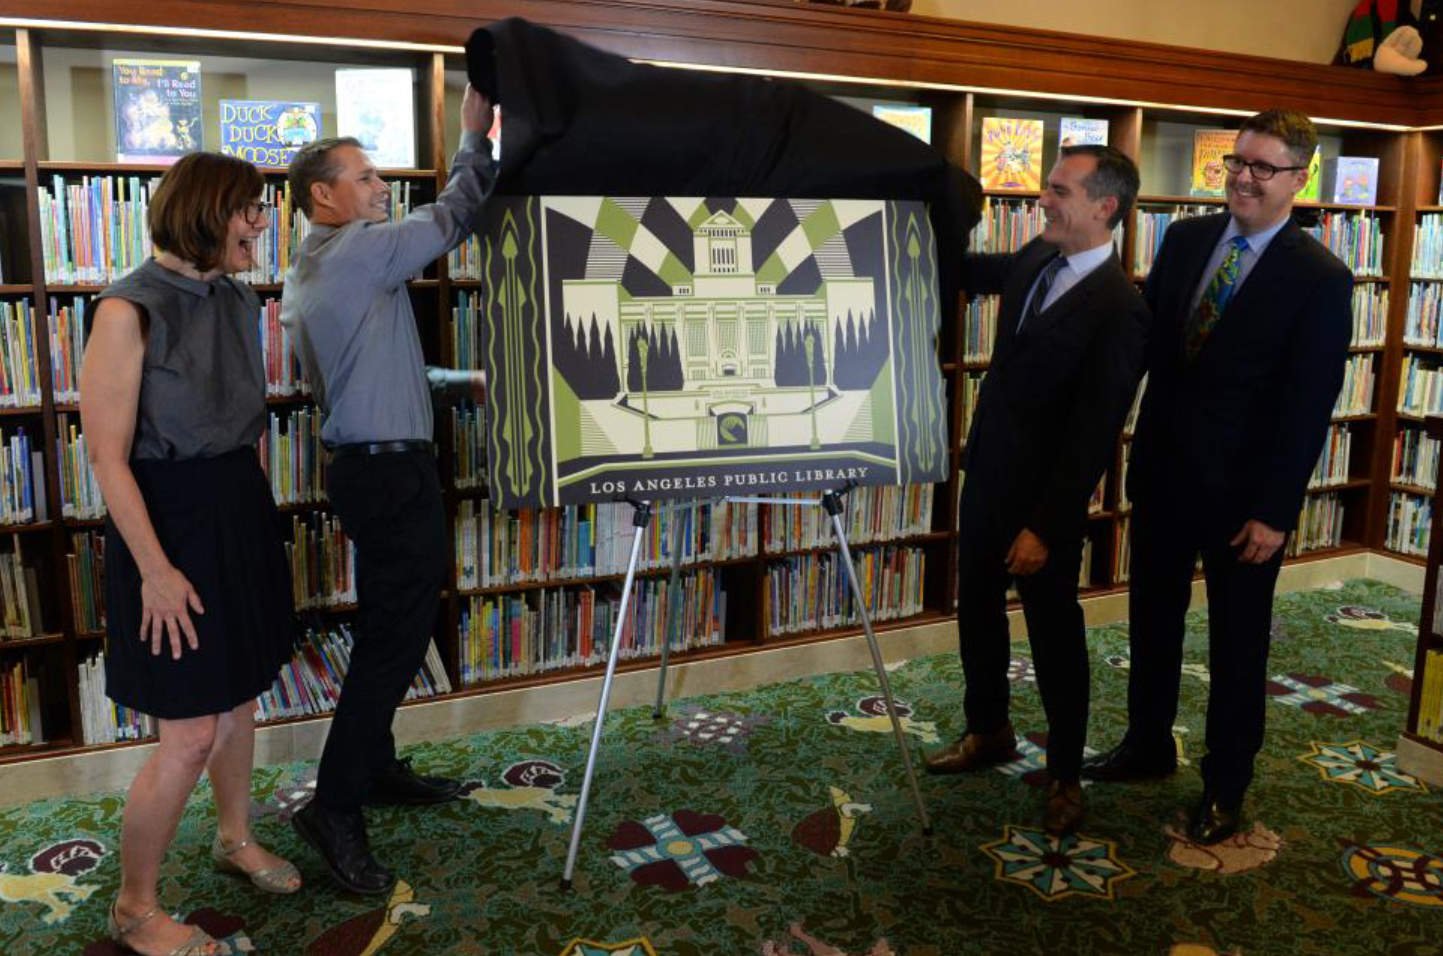 Mayor Garcetti & Artist Shepard Fairey, Renowned for his Obama HOPE Portrait, Unveil L.A.’s First Artist-Designed Library Card